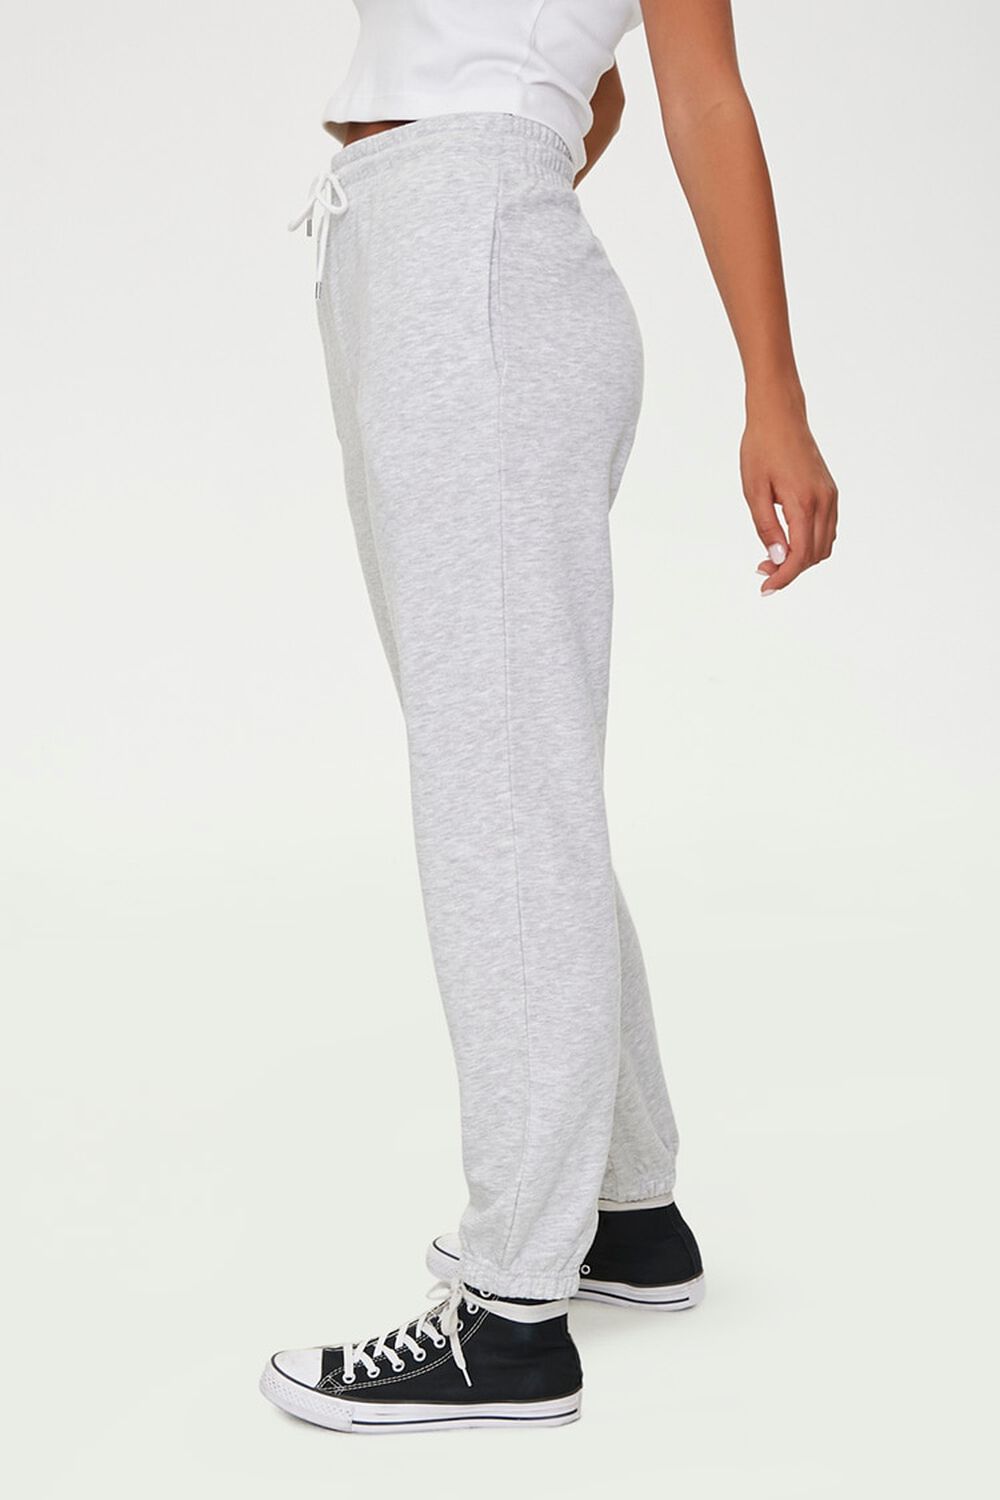 French Terry Drawstring Pants, image 3